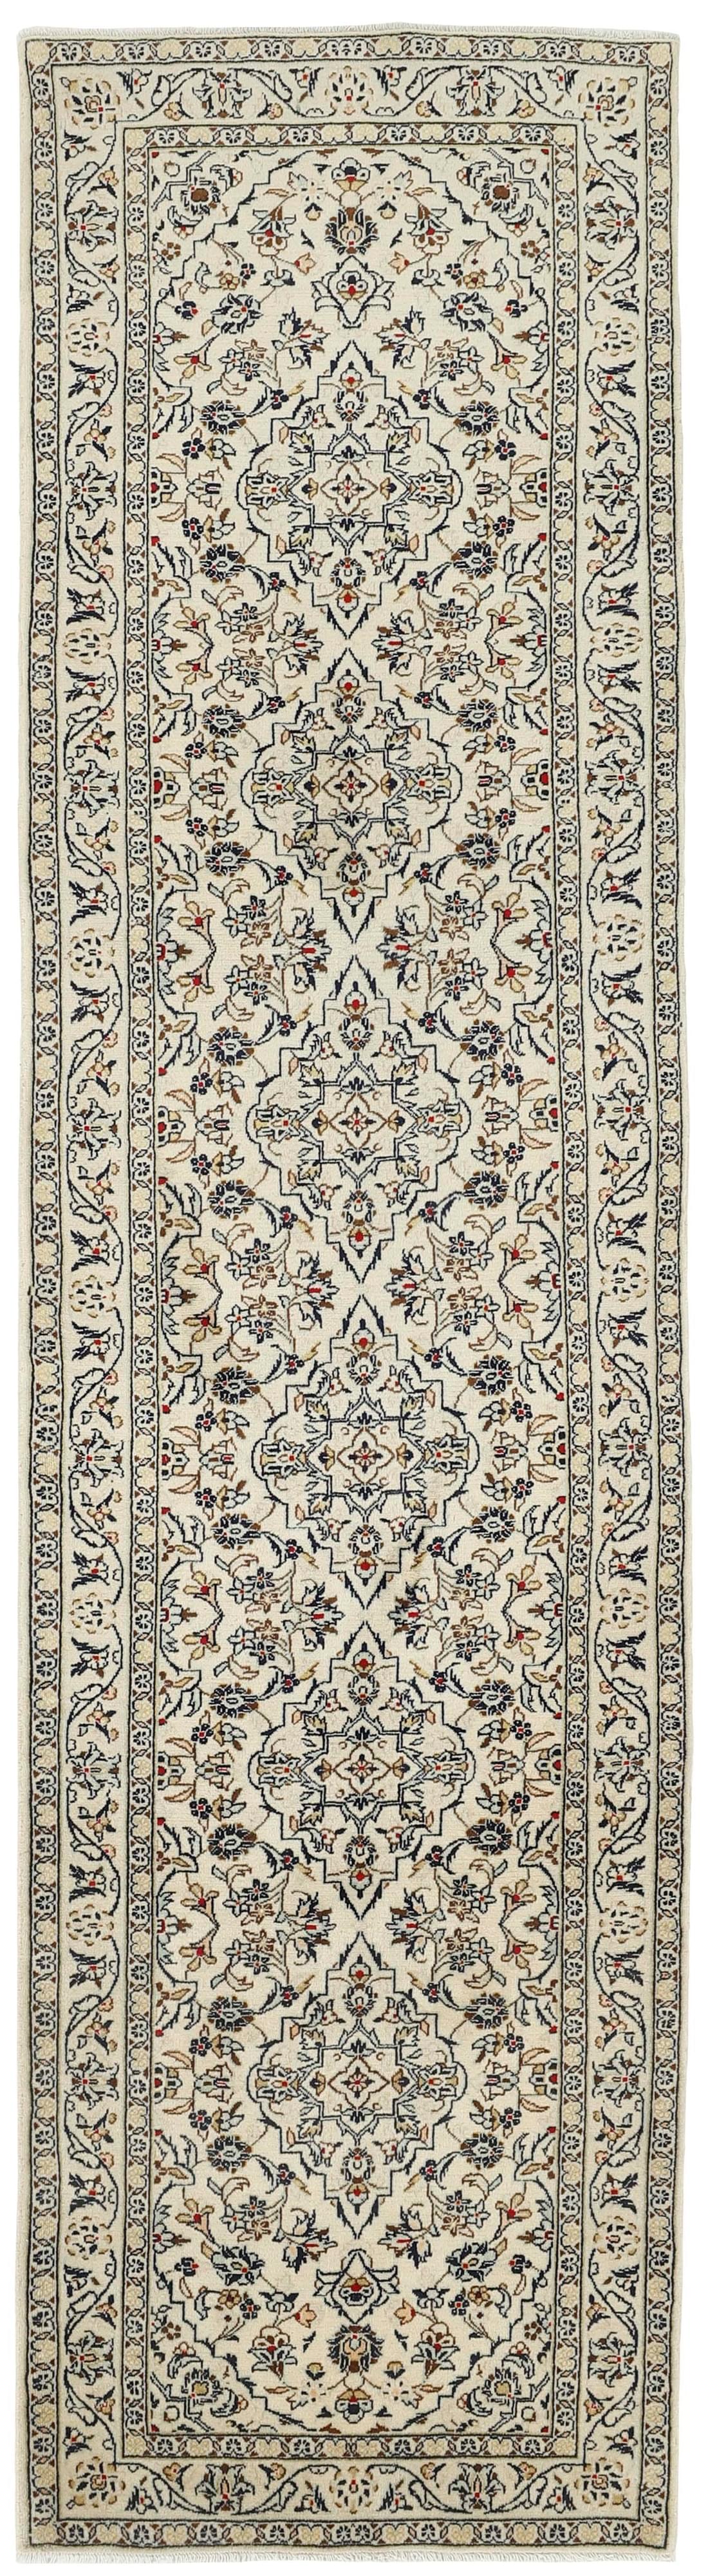 Authentic persian runner with traditional floral design in beige, blue and cream